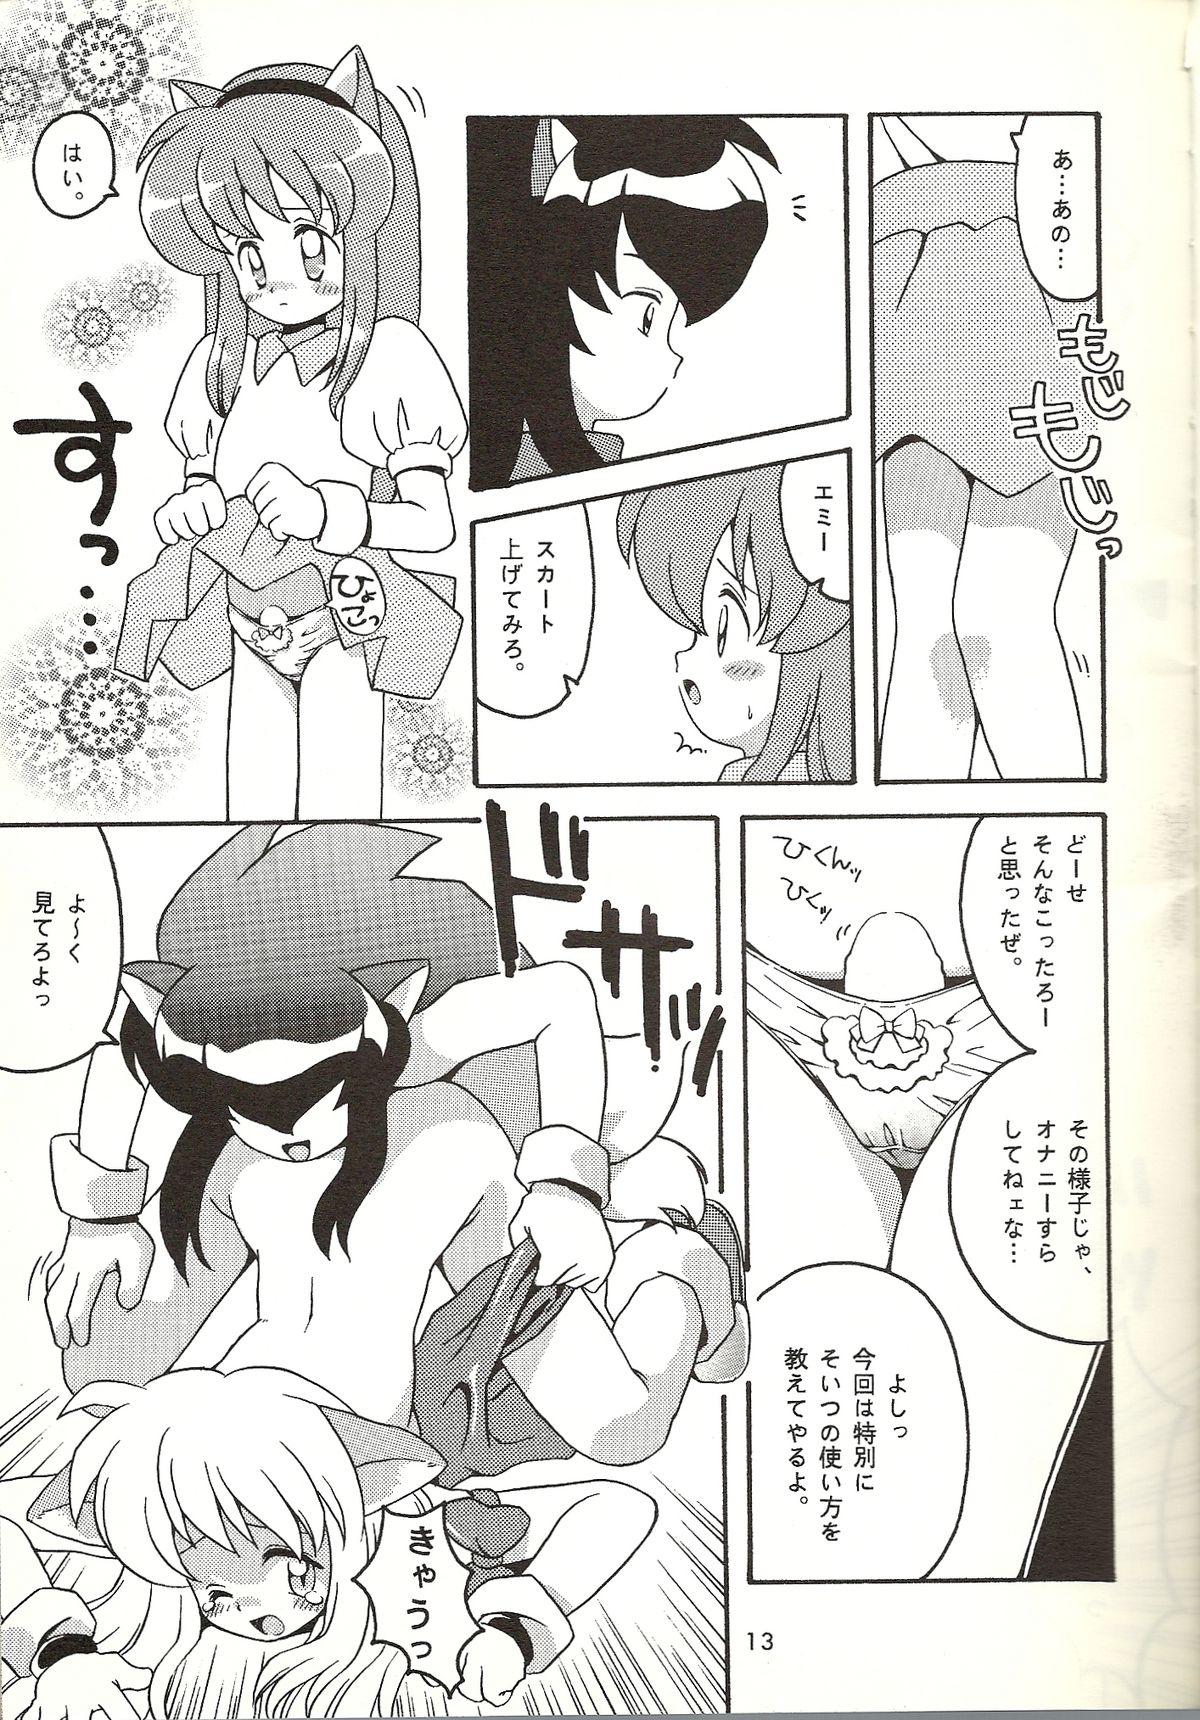 Mulher O - Guardian heroes Sonic the hedgehog Roundass - Page 11